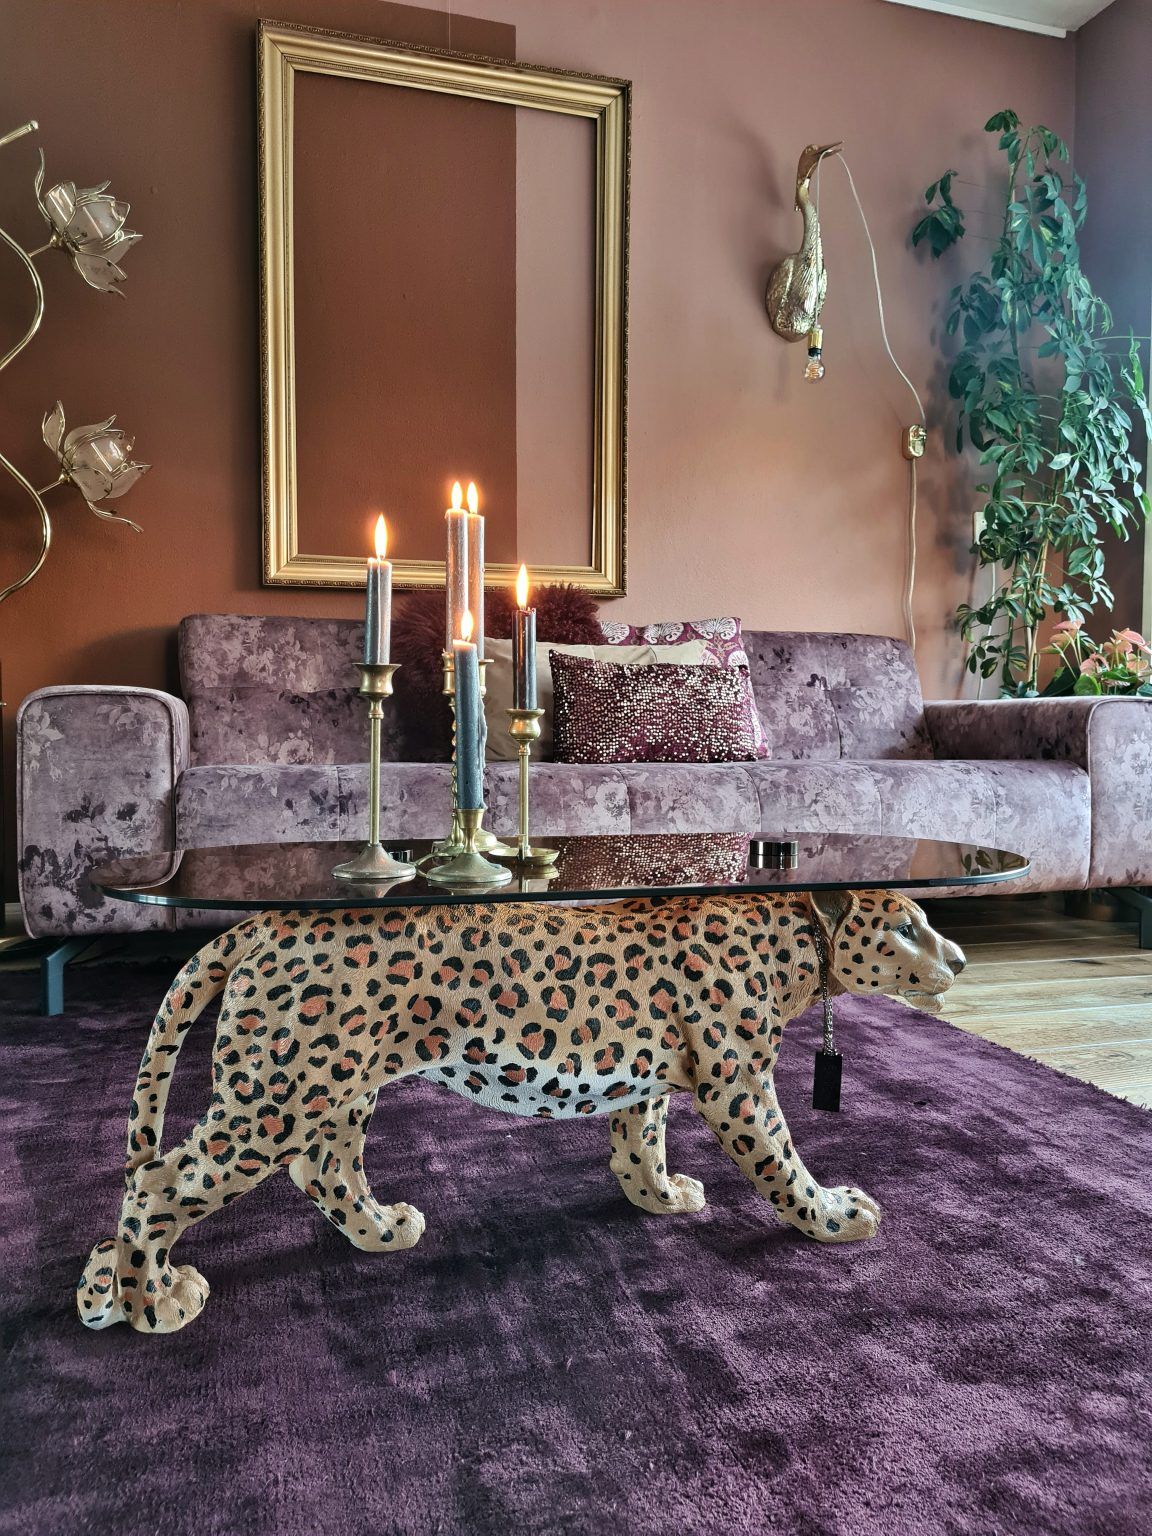 The Sculptural Animal as The Striking Accent in The Art Deco Living Room